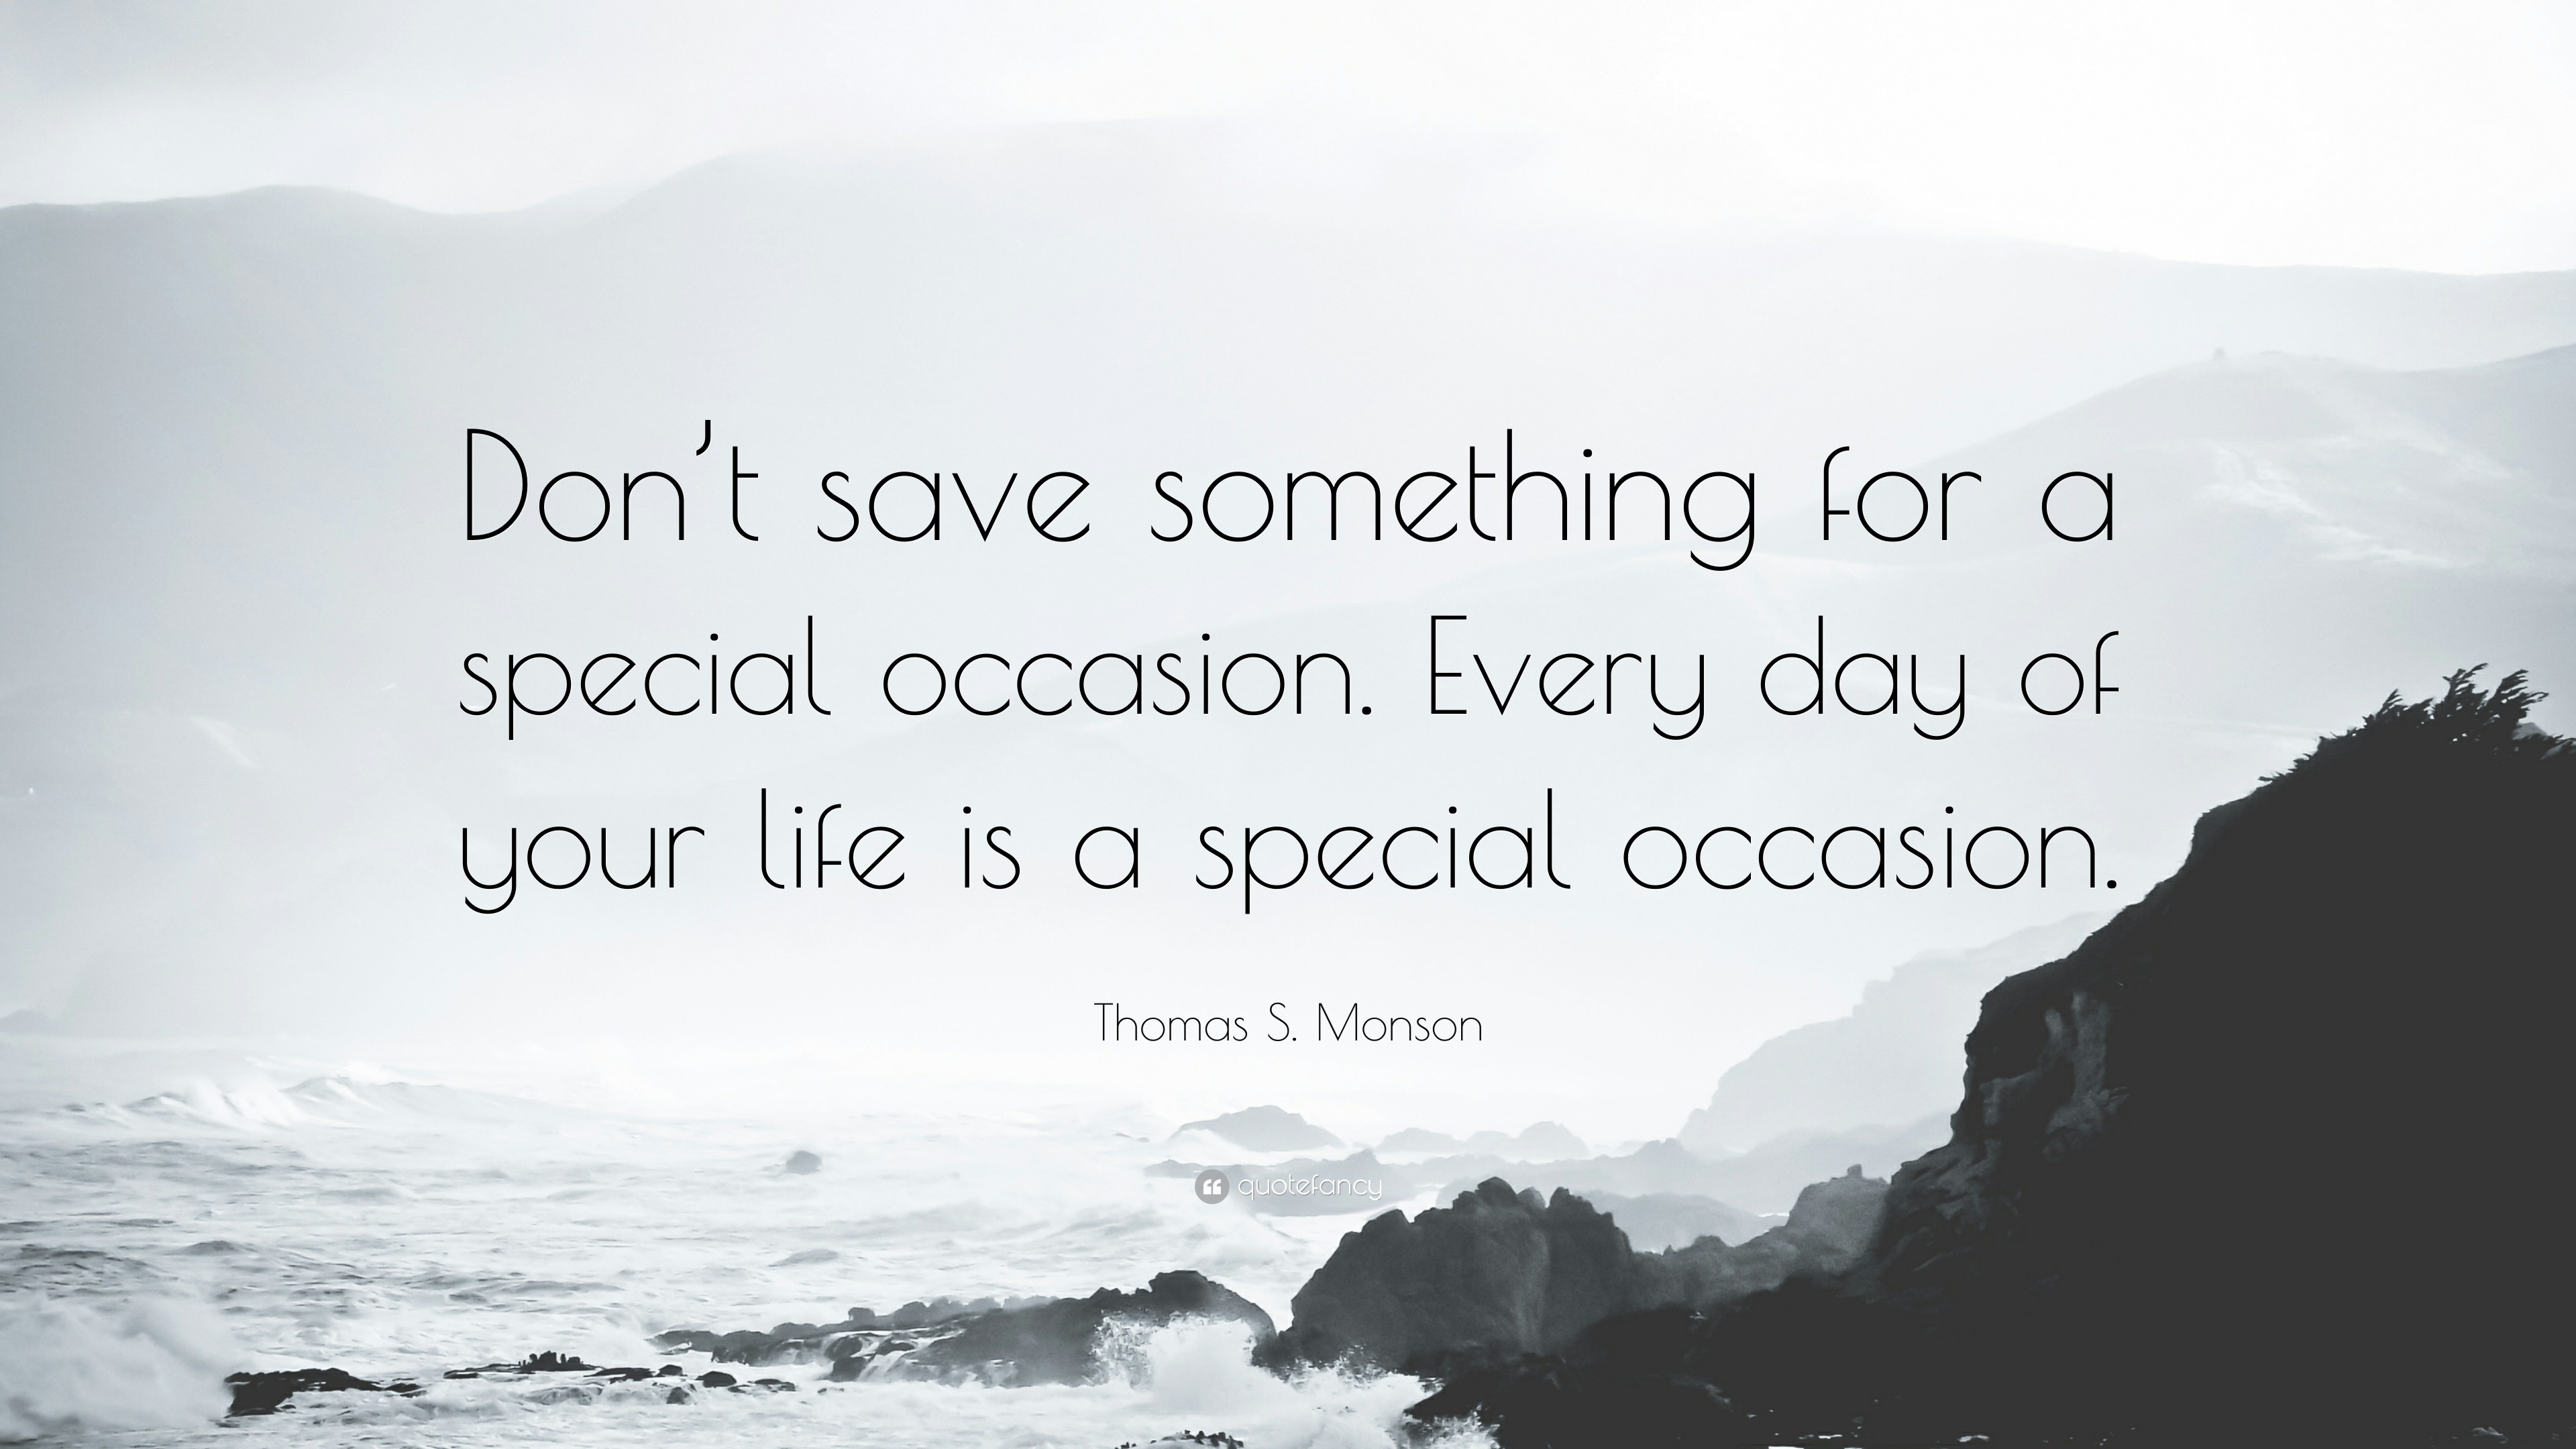 Thomas S. Monson Quote: “Don't save something for a special